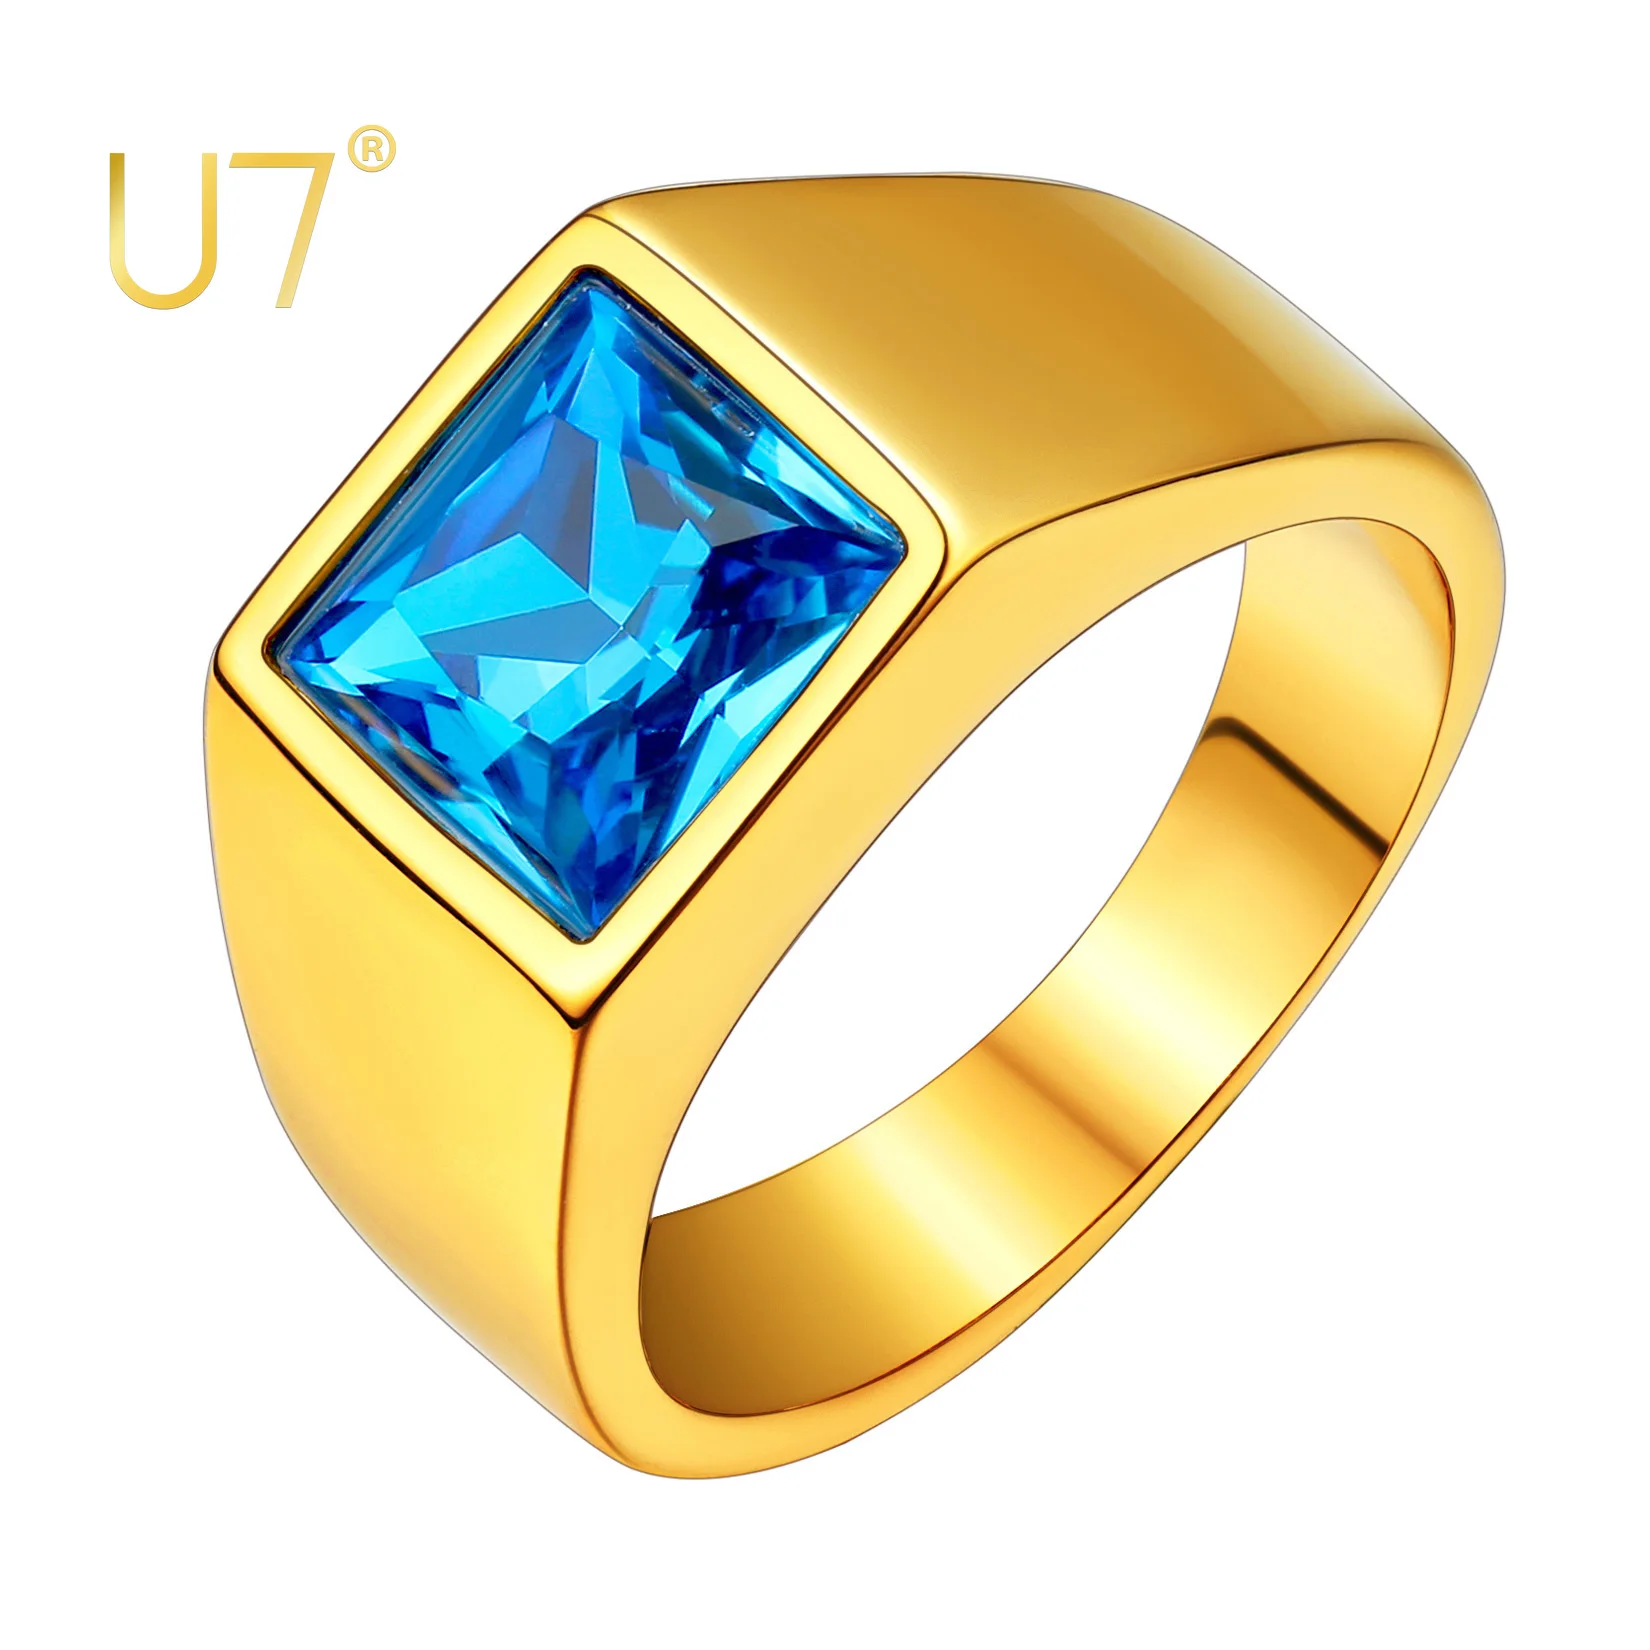 

U7 Men Personalized Signet Rings Stainless Steel Ring with Square Gemstone Birthstones Size 7-14